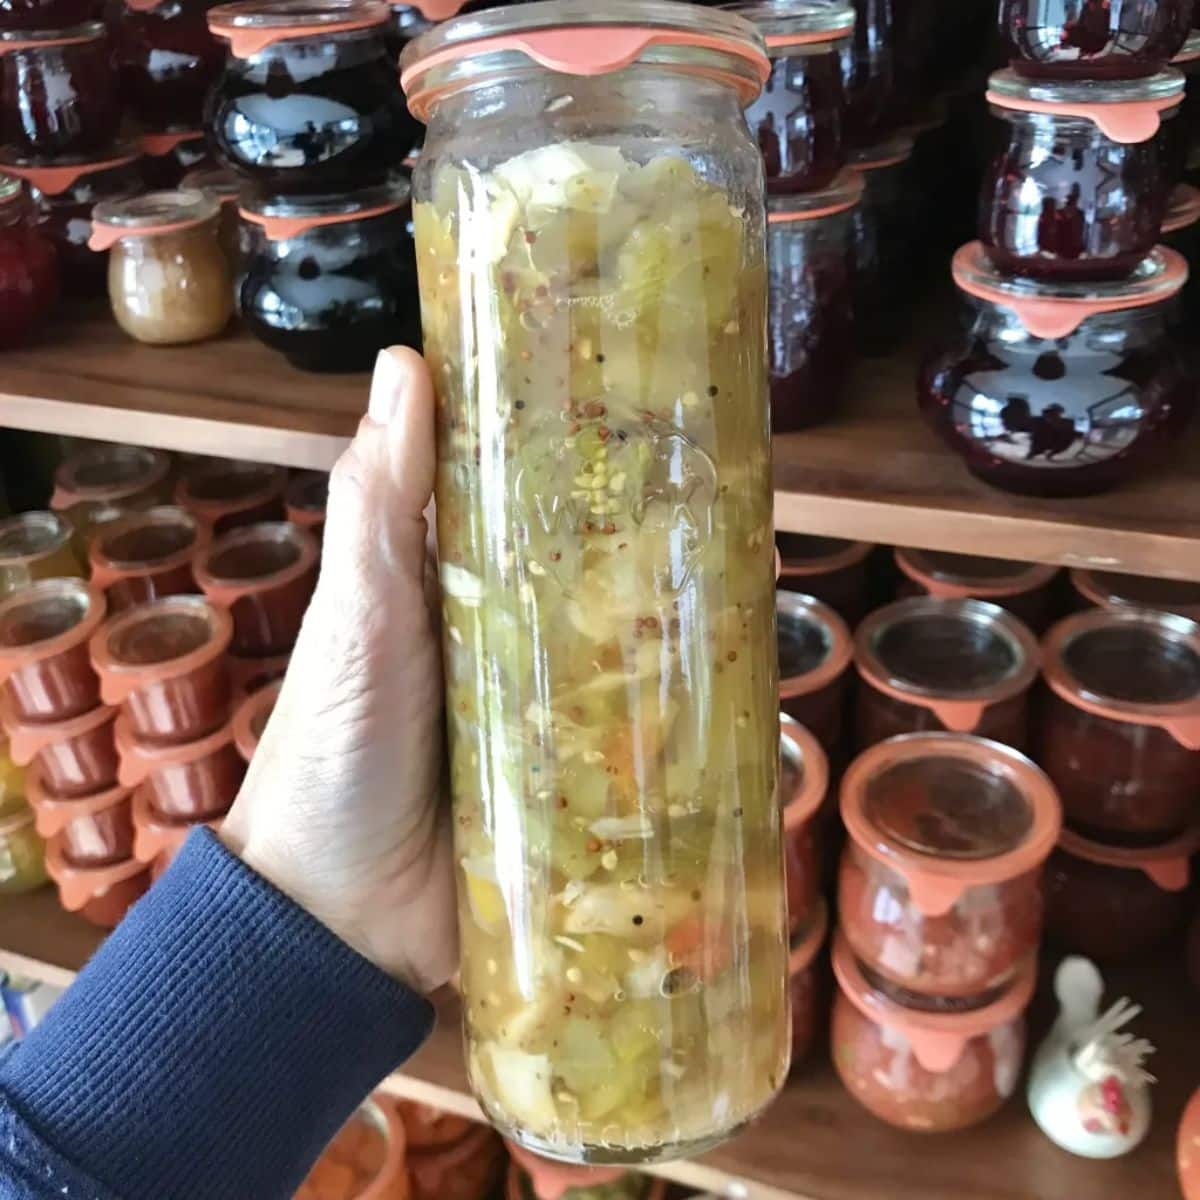 Green tomato piccalilli canned in a glass jar held by hand.